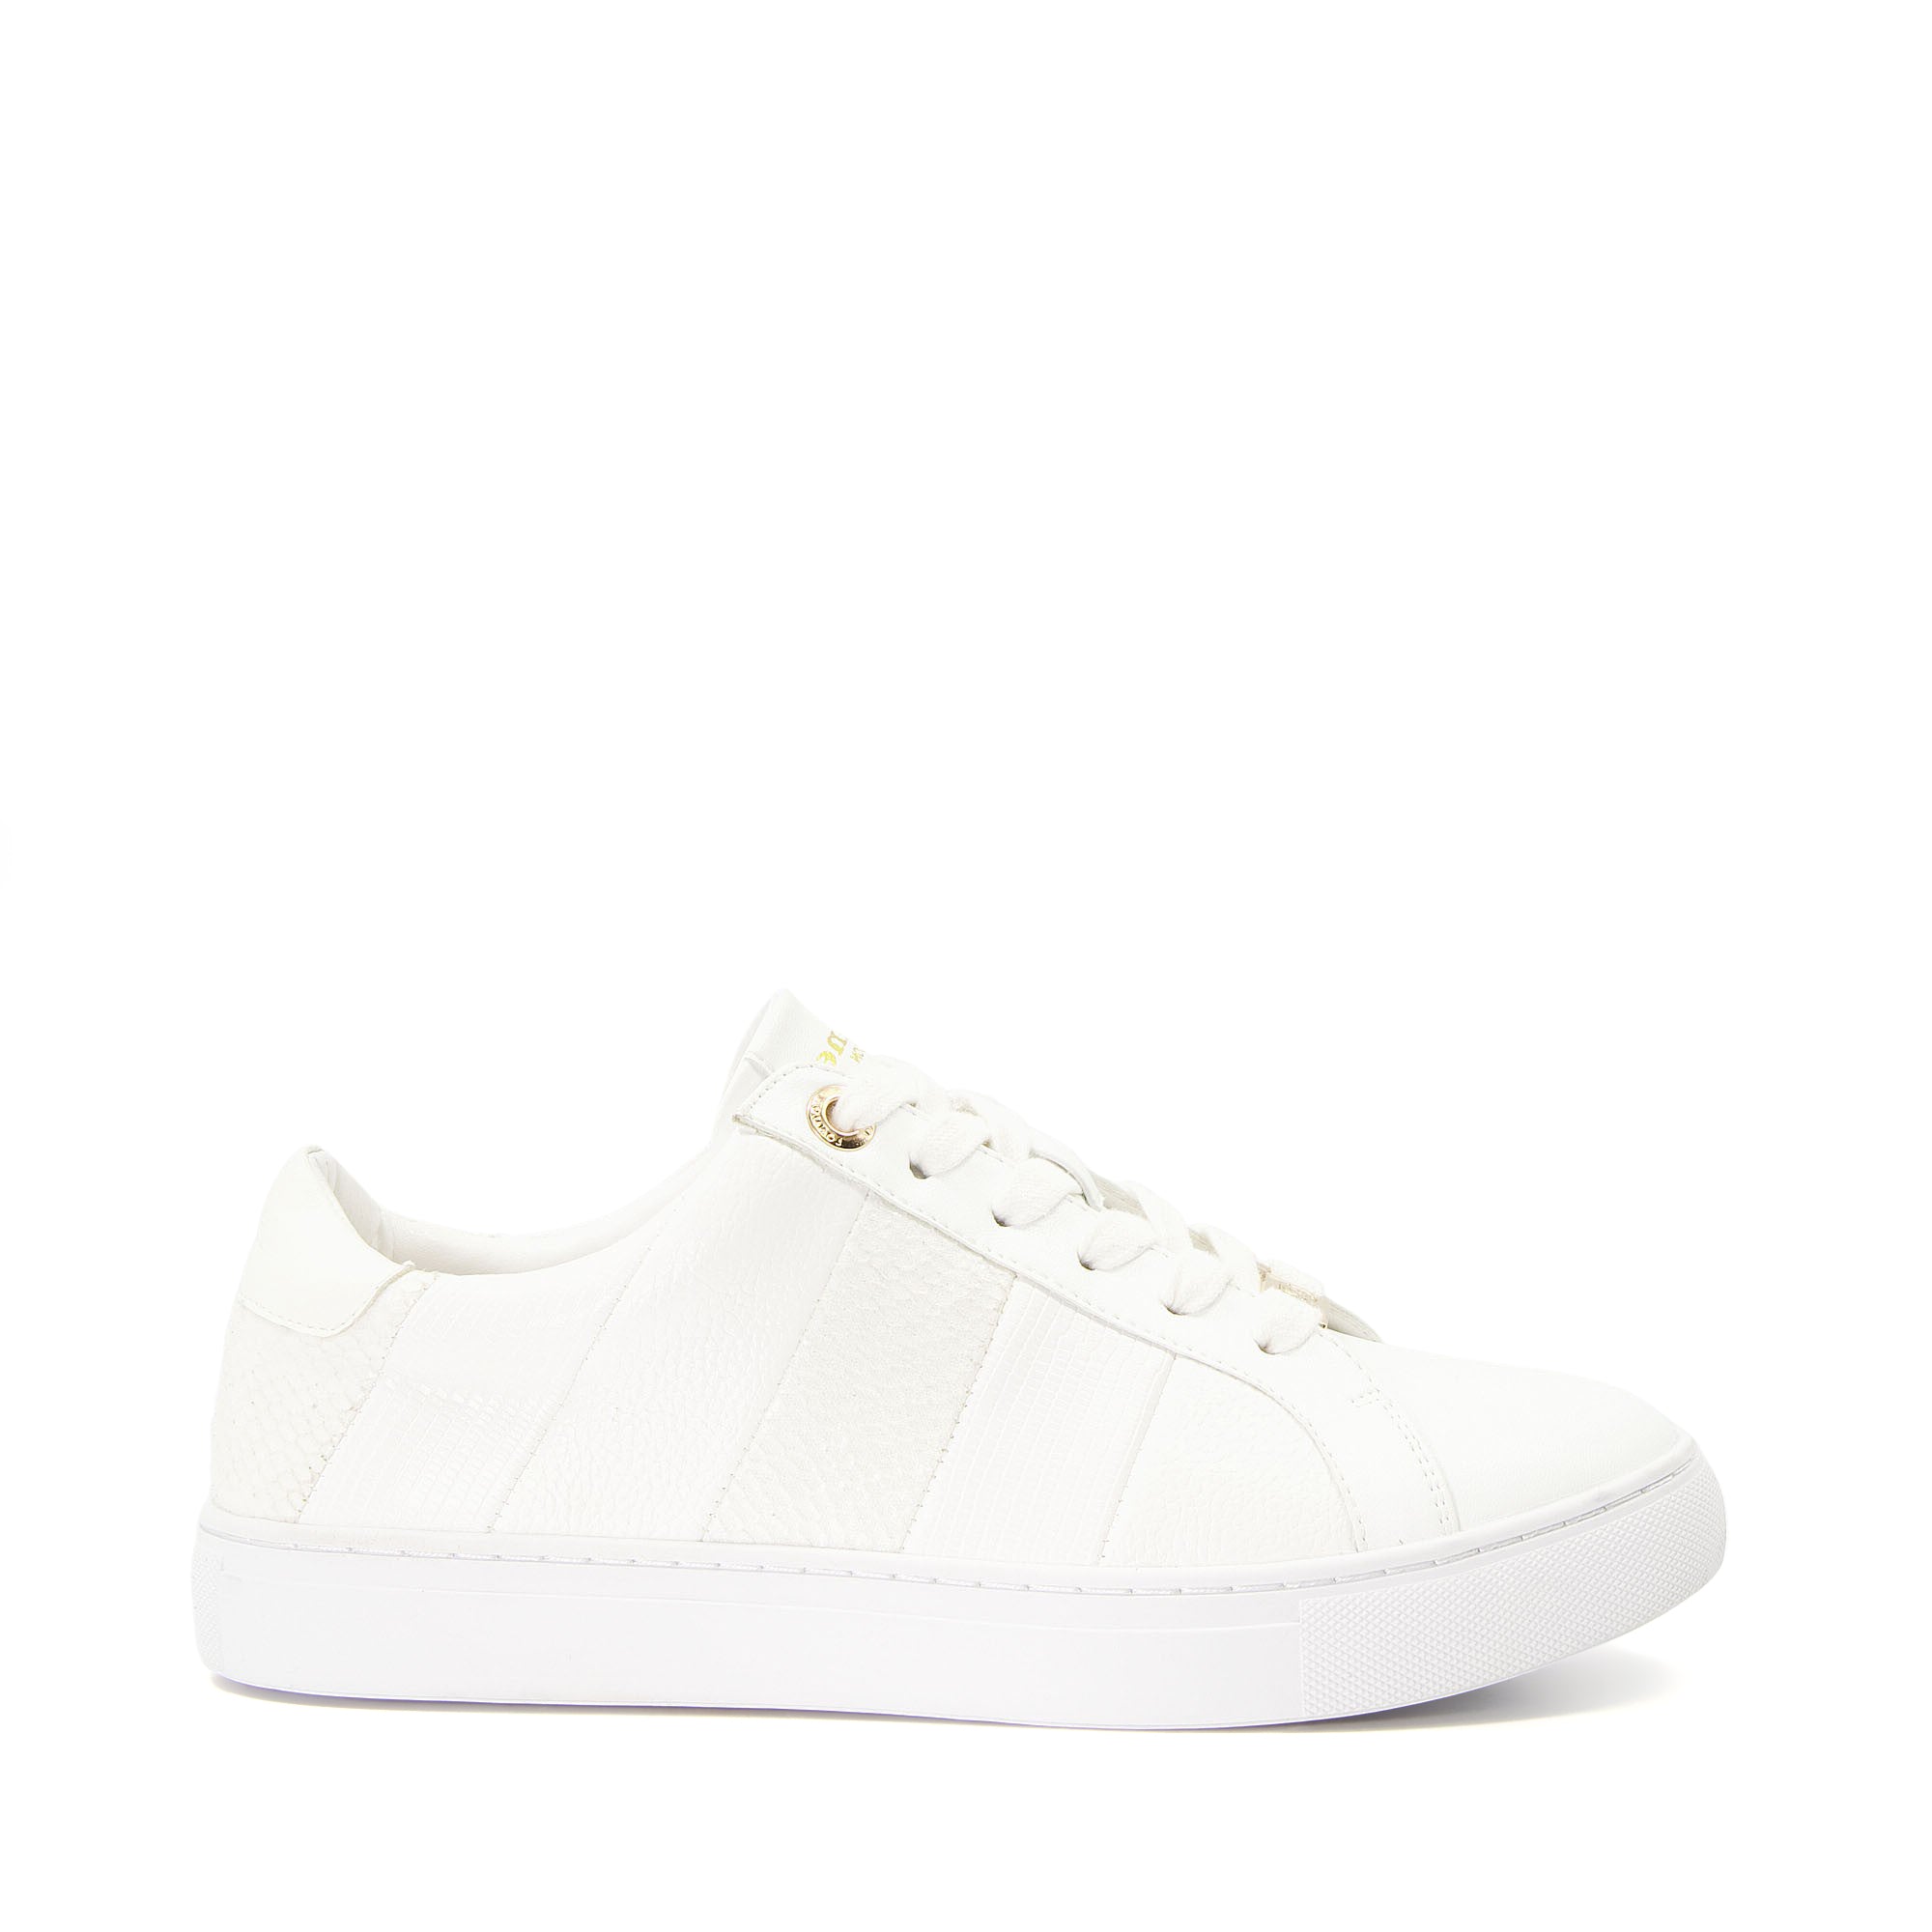 EVERLEIGH - Croc And Snake Trim Lace-Up Trainers